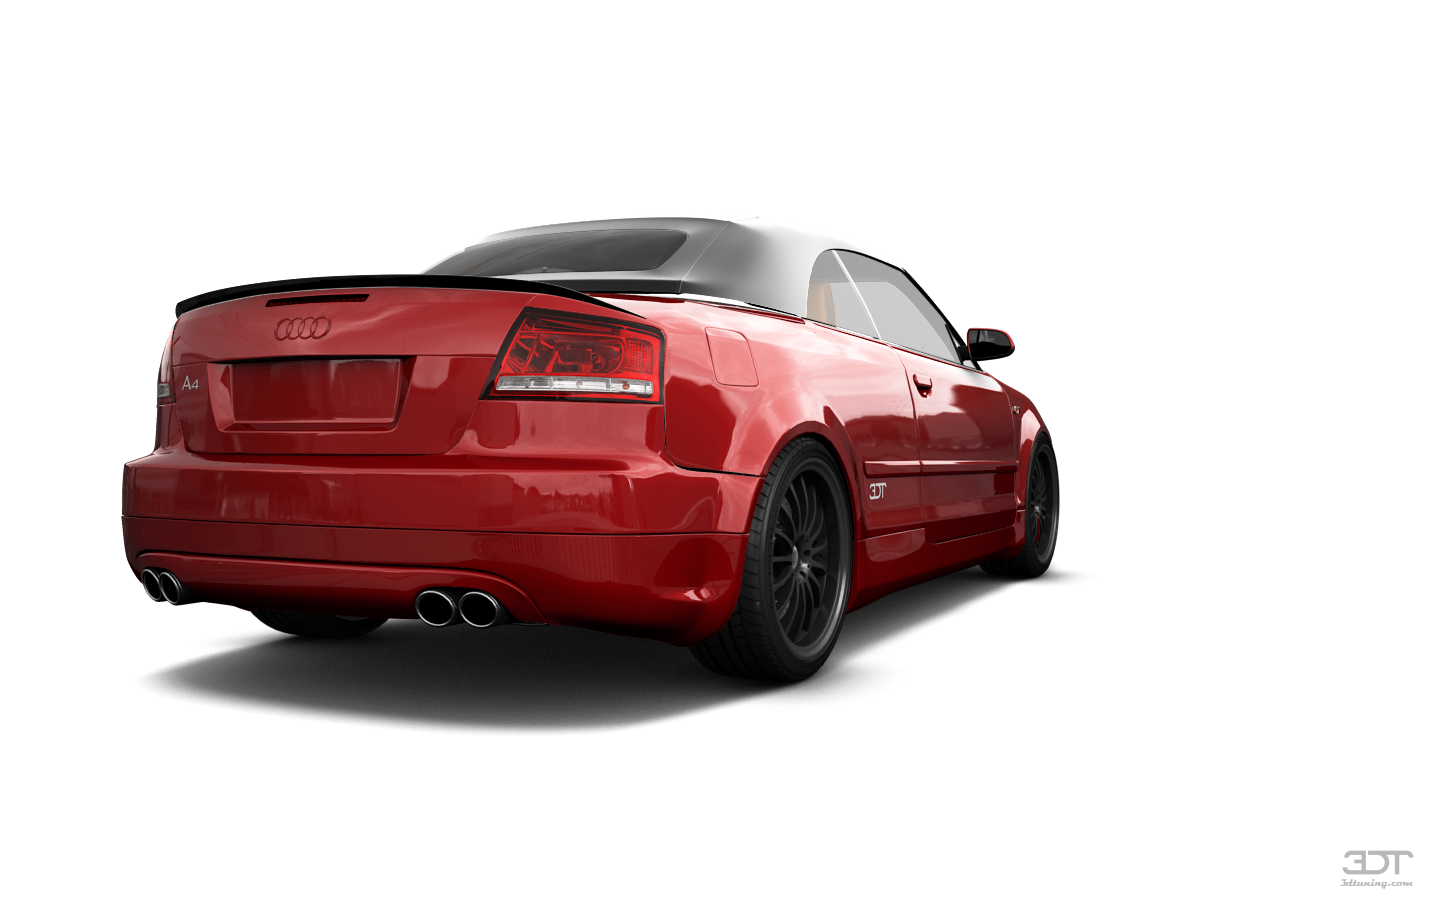 Audi A4 Cabriolet 2006 tuning